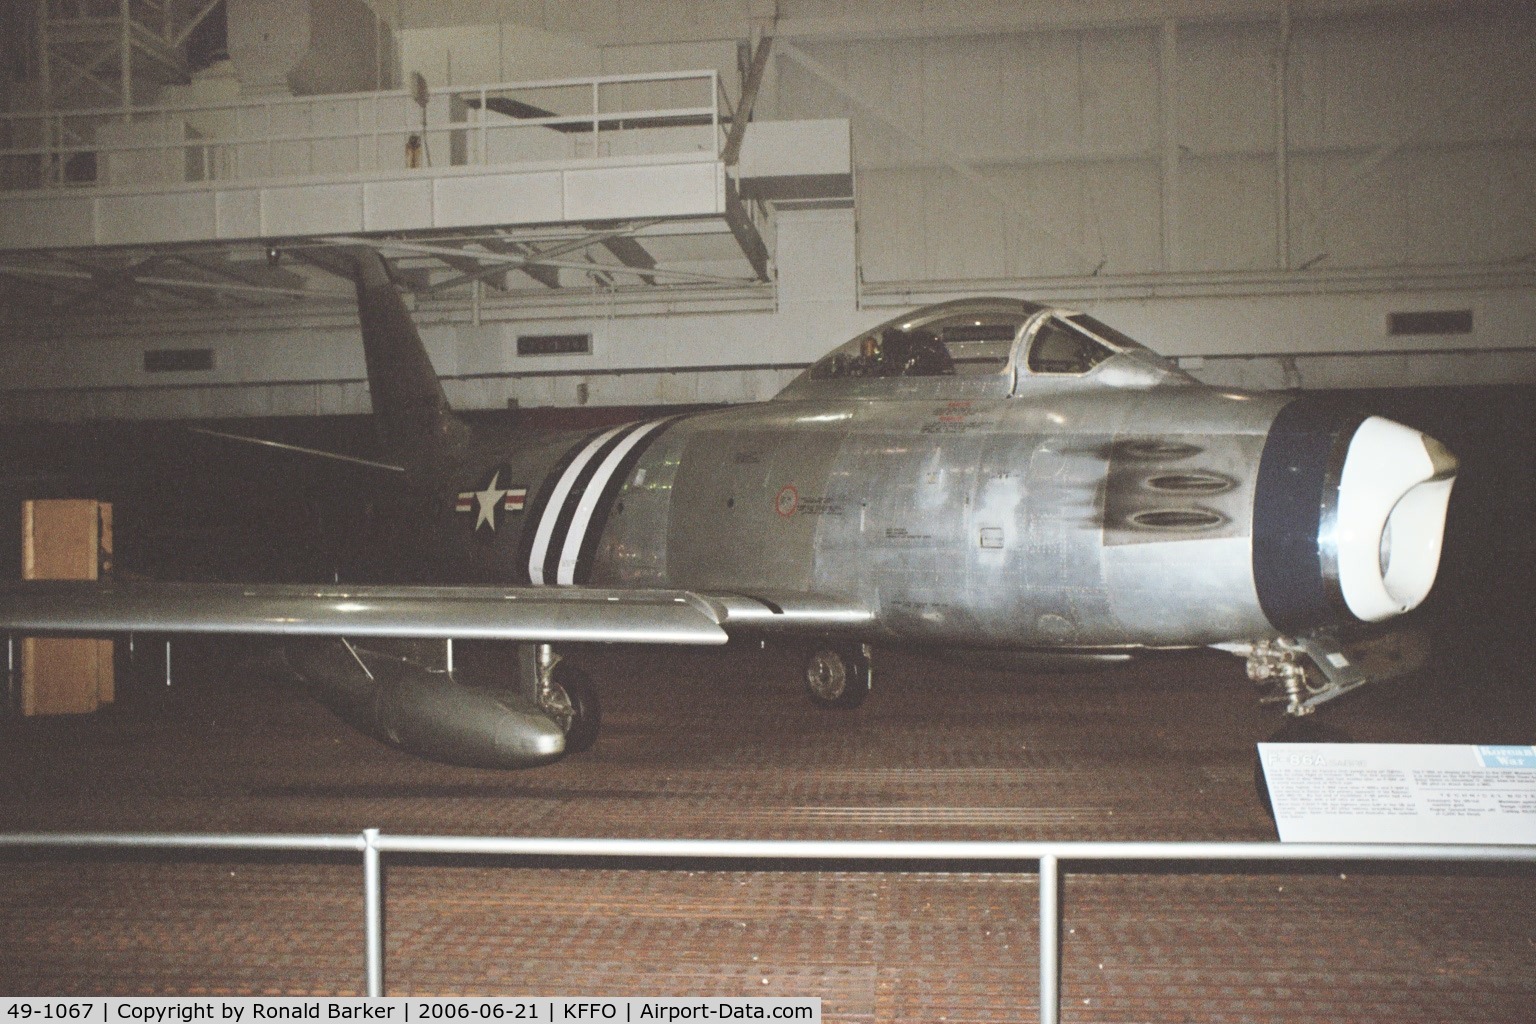 49-1067, 1949 North American F-86A-5-NA Sabre C/N 161-61, National Museum of the Air Force
49-1067 painted as 49-1236